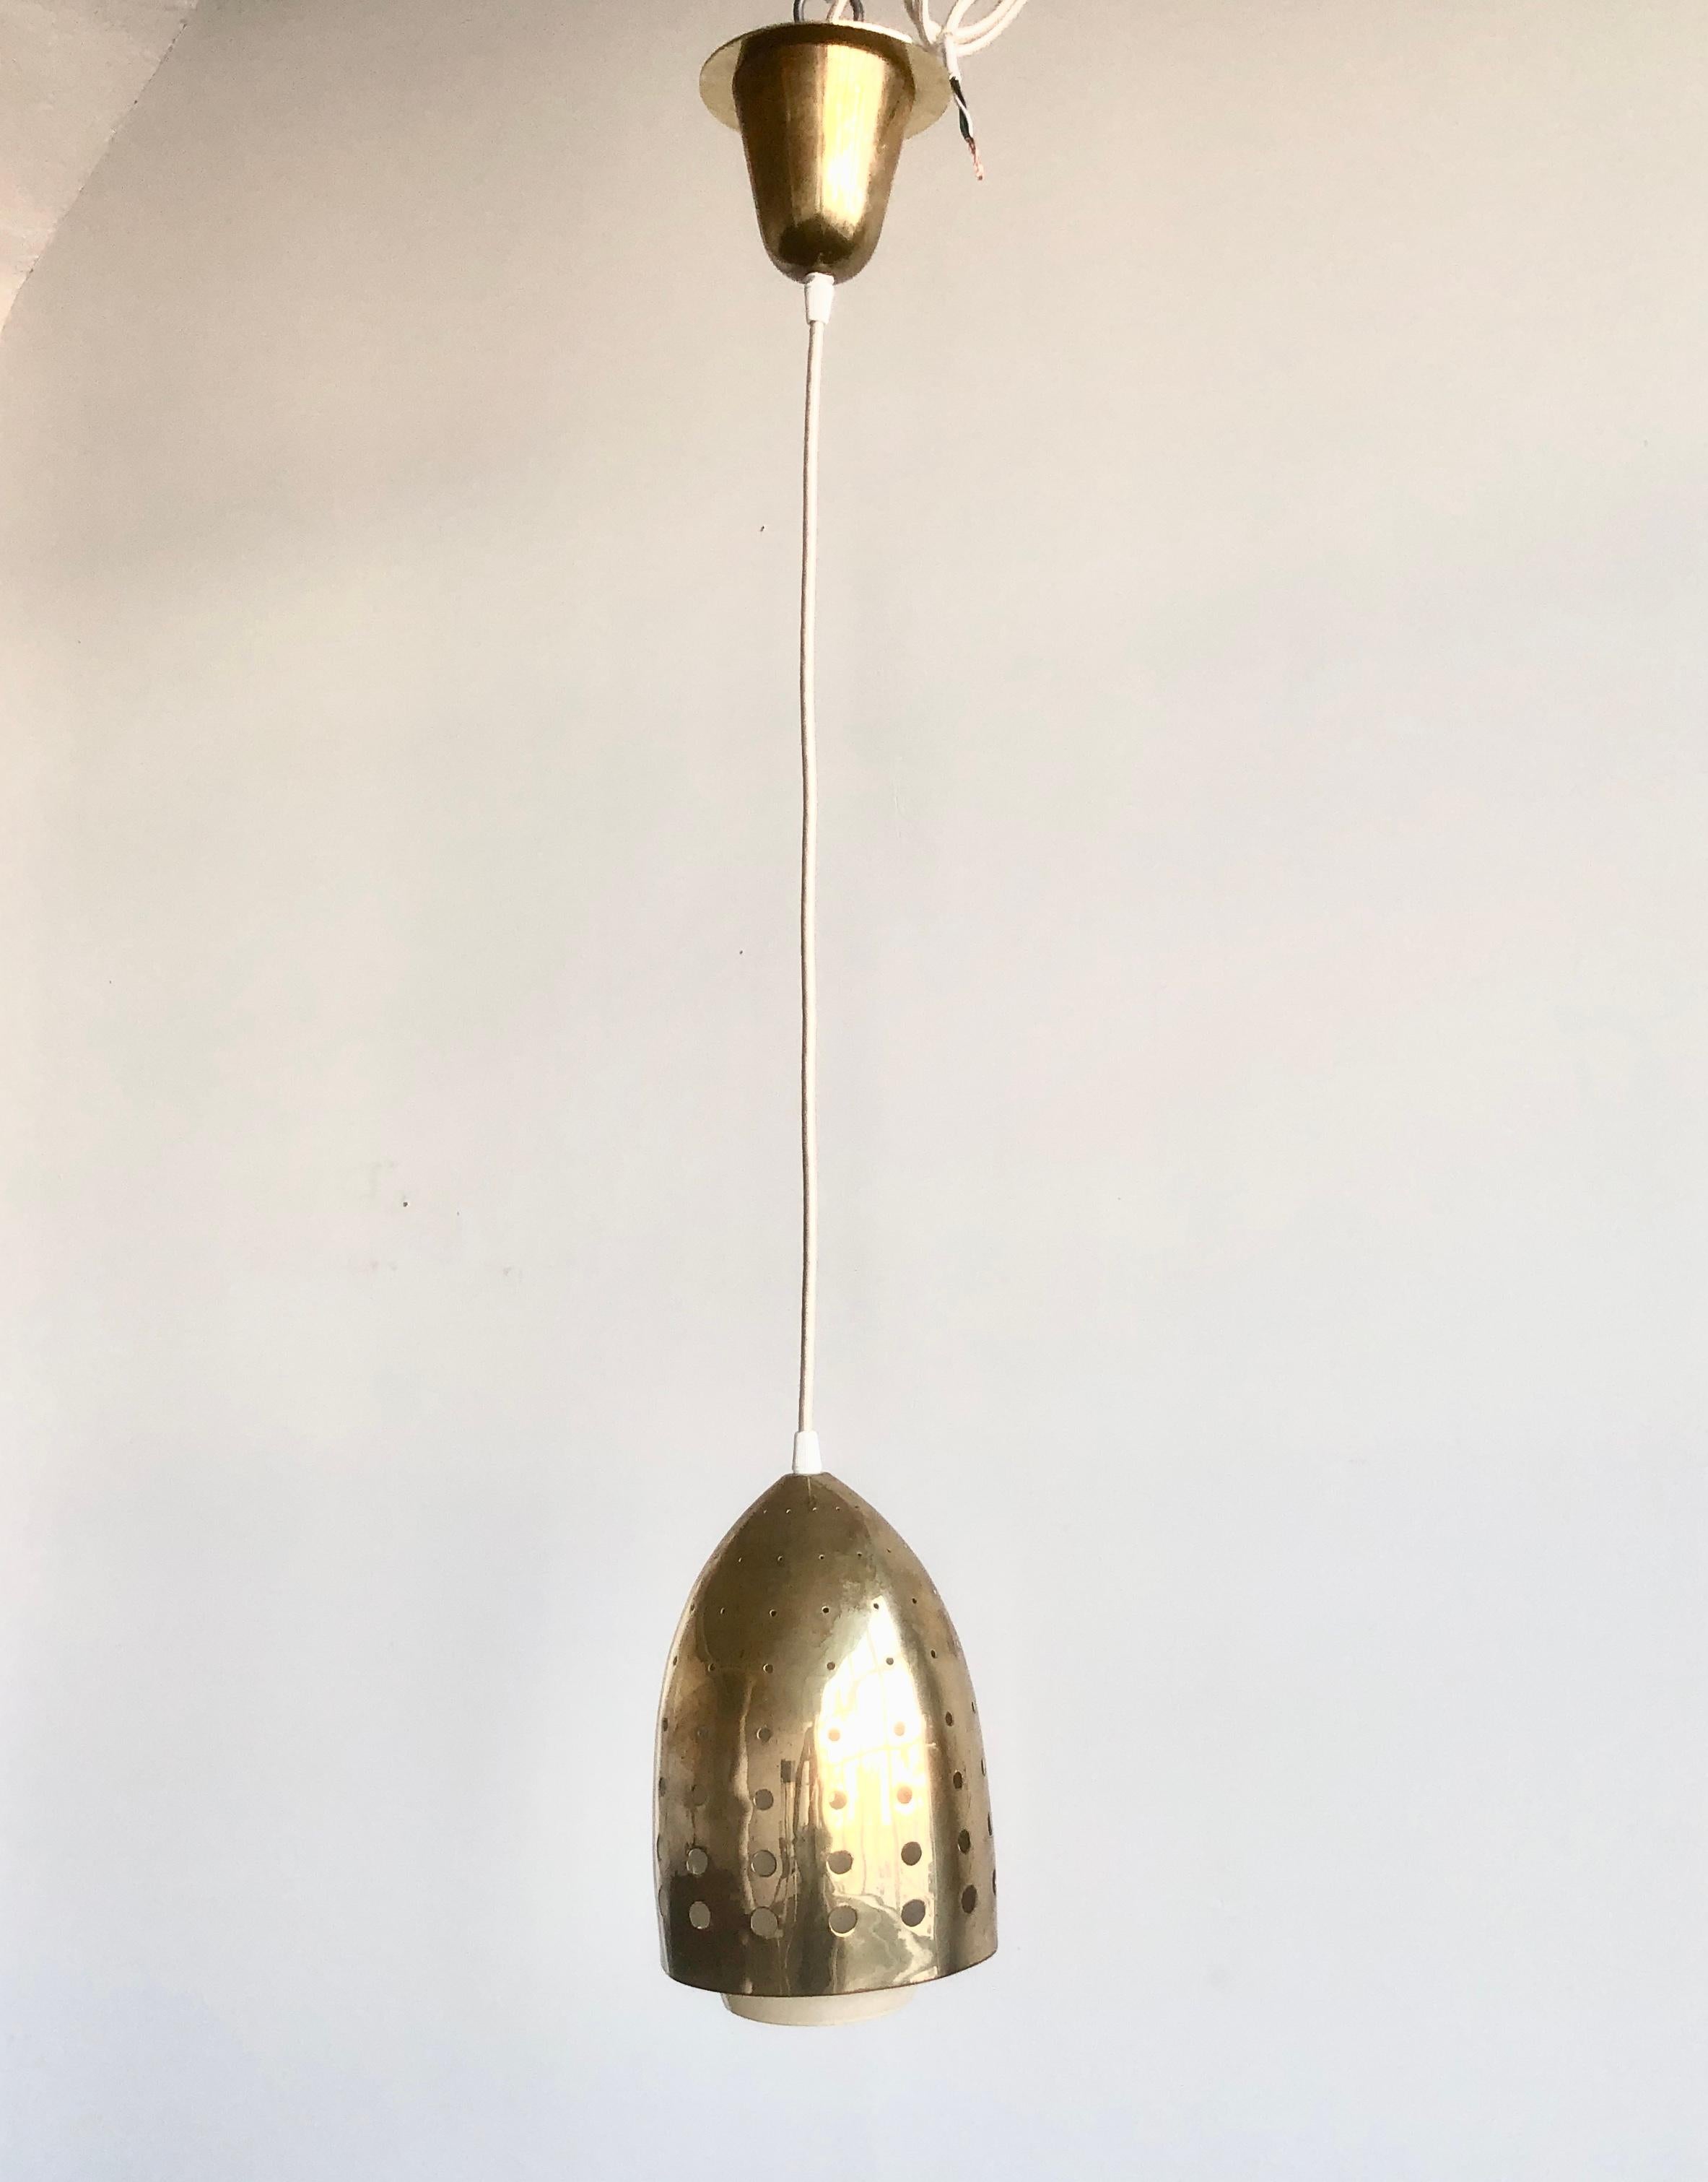 Lighting pendant designed by Paavo Tynell for Idman, Model number 51150, Finland , circa 1950th. Perforated brass shade with inner glass shade.
Newly rewired, overall drop 36